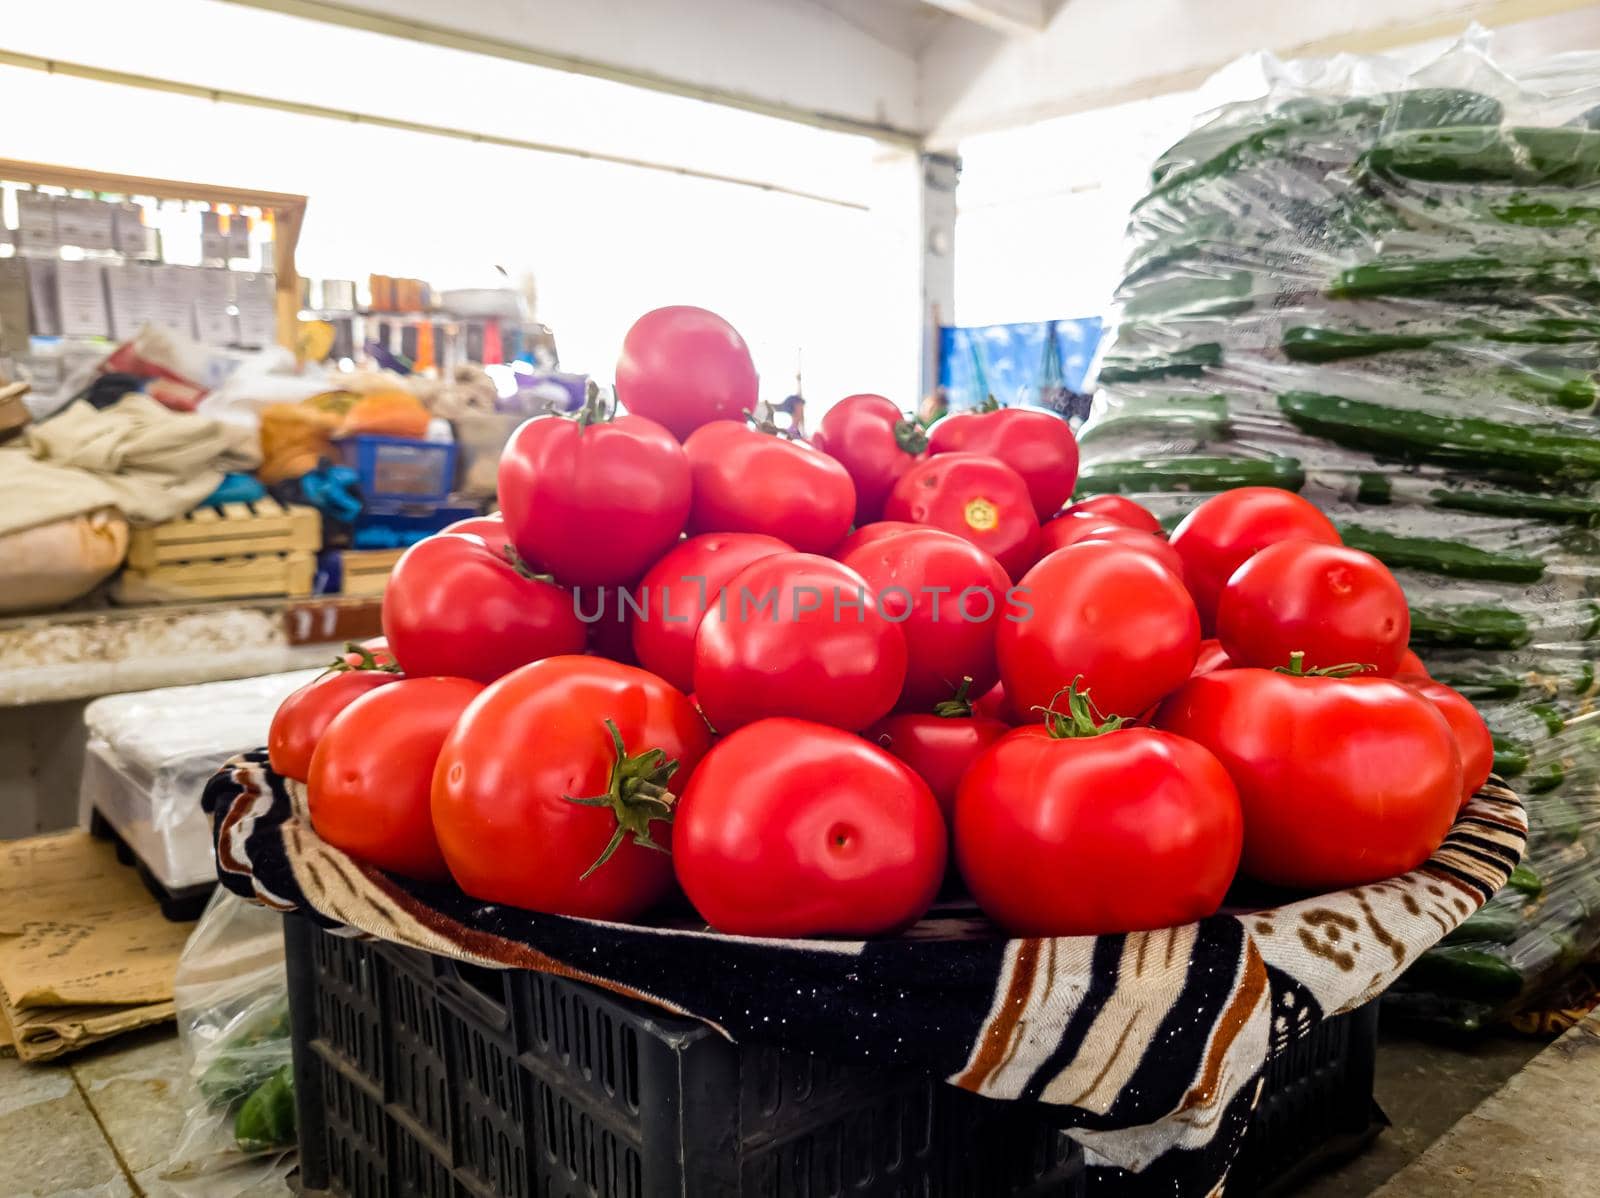 Street market with vegetables and fruits. Shopping for a bazaar. Counter with tomatoes by Milanchikov